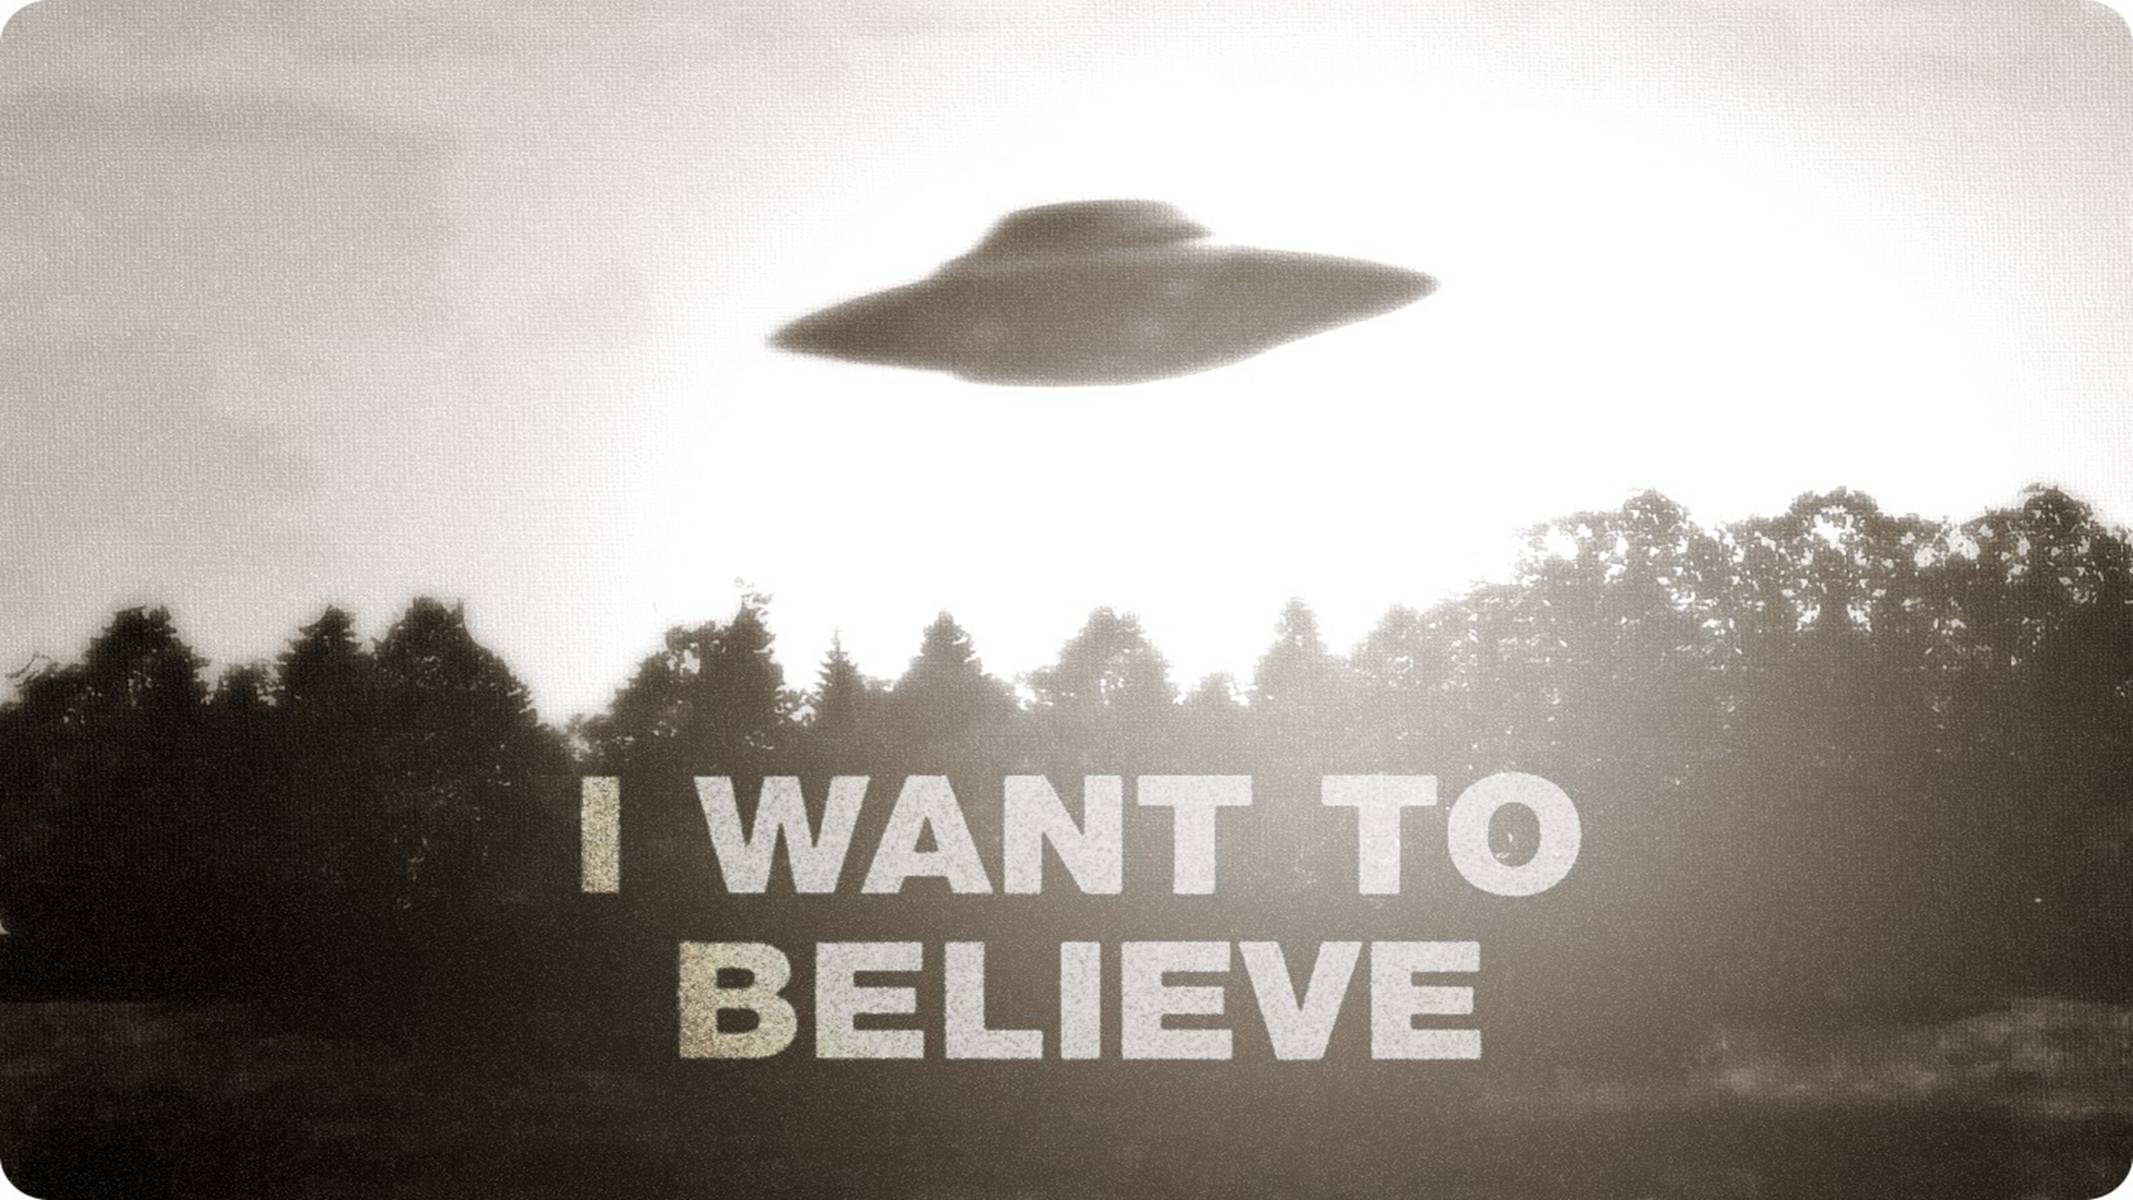 Live i do you want. Постер i want to believe. I want to believe секретные материалы. Плакат с НЛО I want to believe. X files i want to believe плакат.